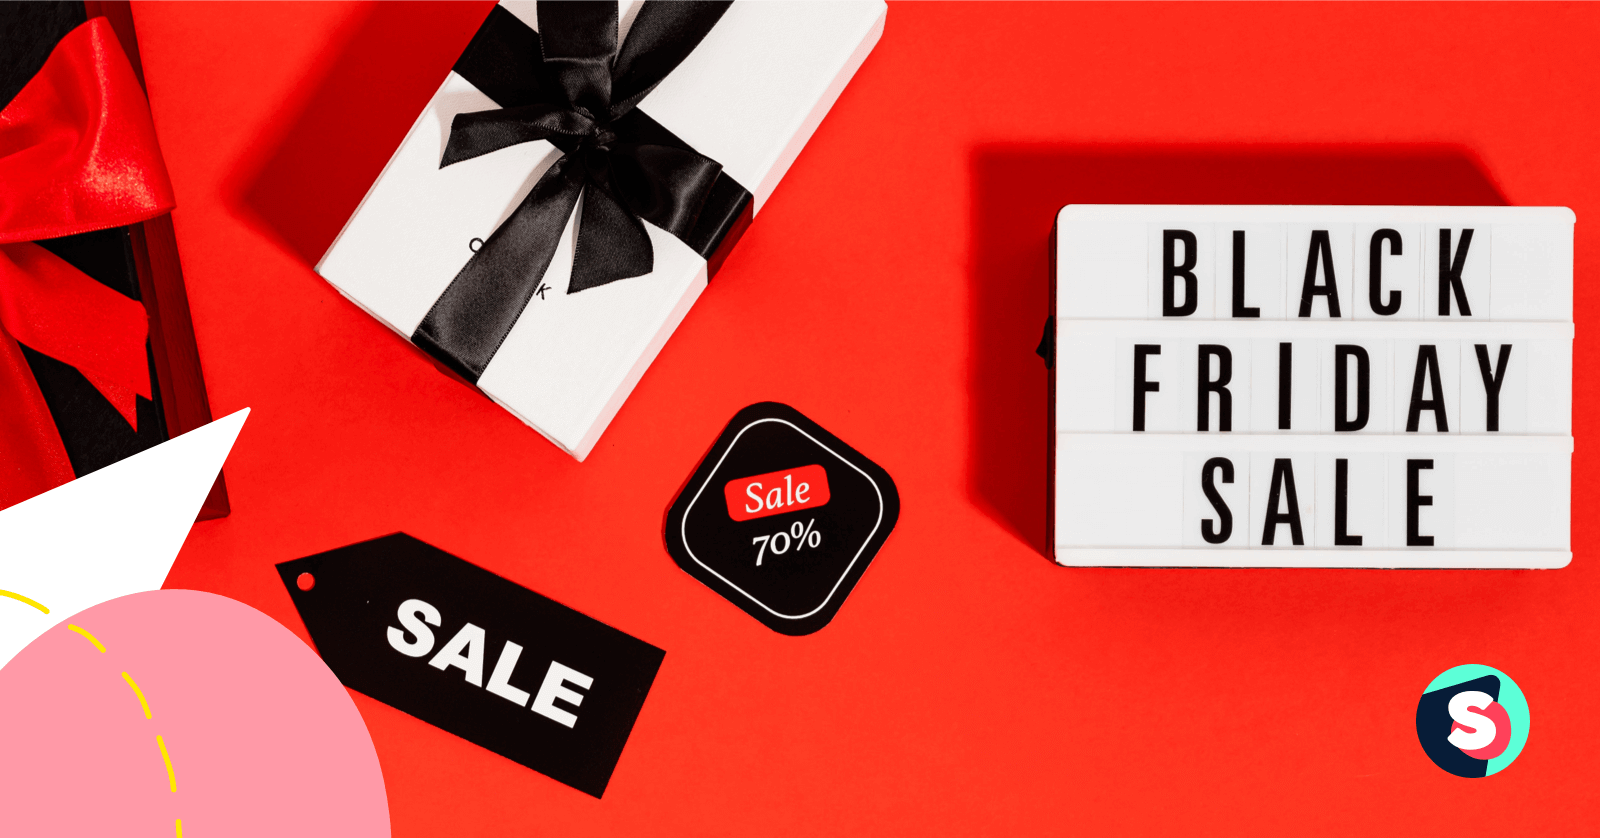 5 Black Friday Cyber Monday Social Media Campaigns You Can Steal